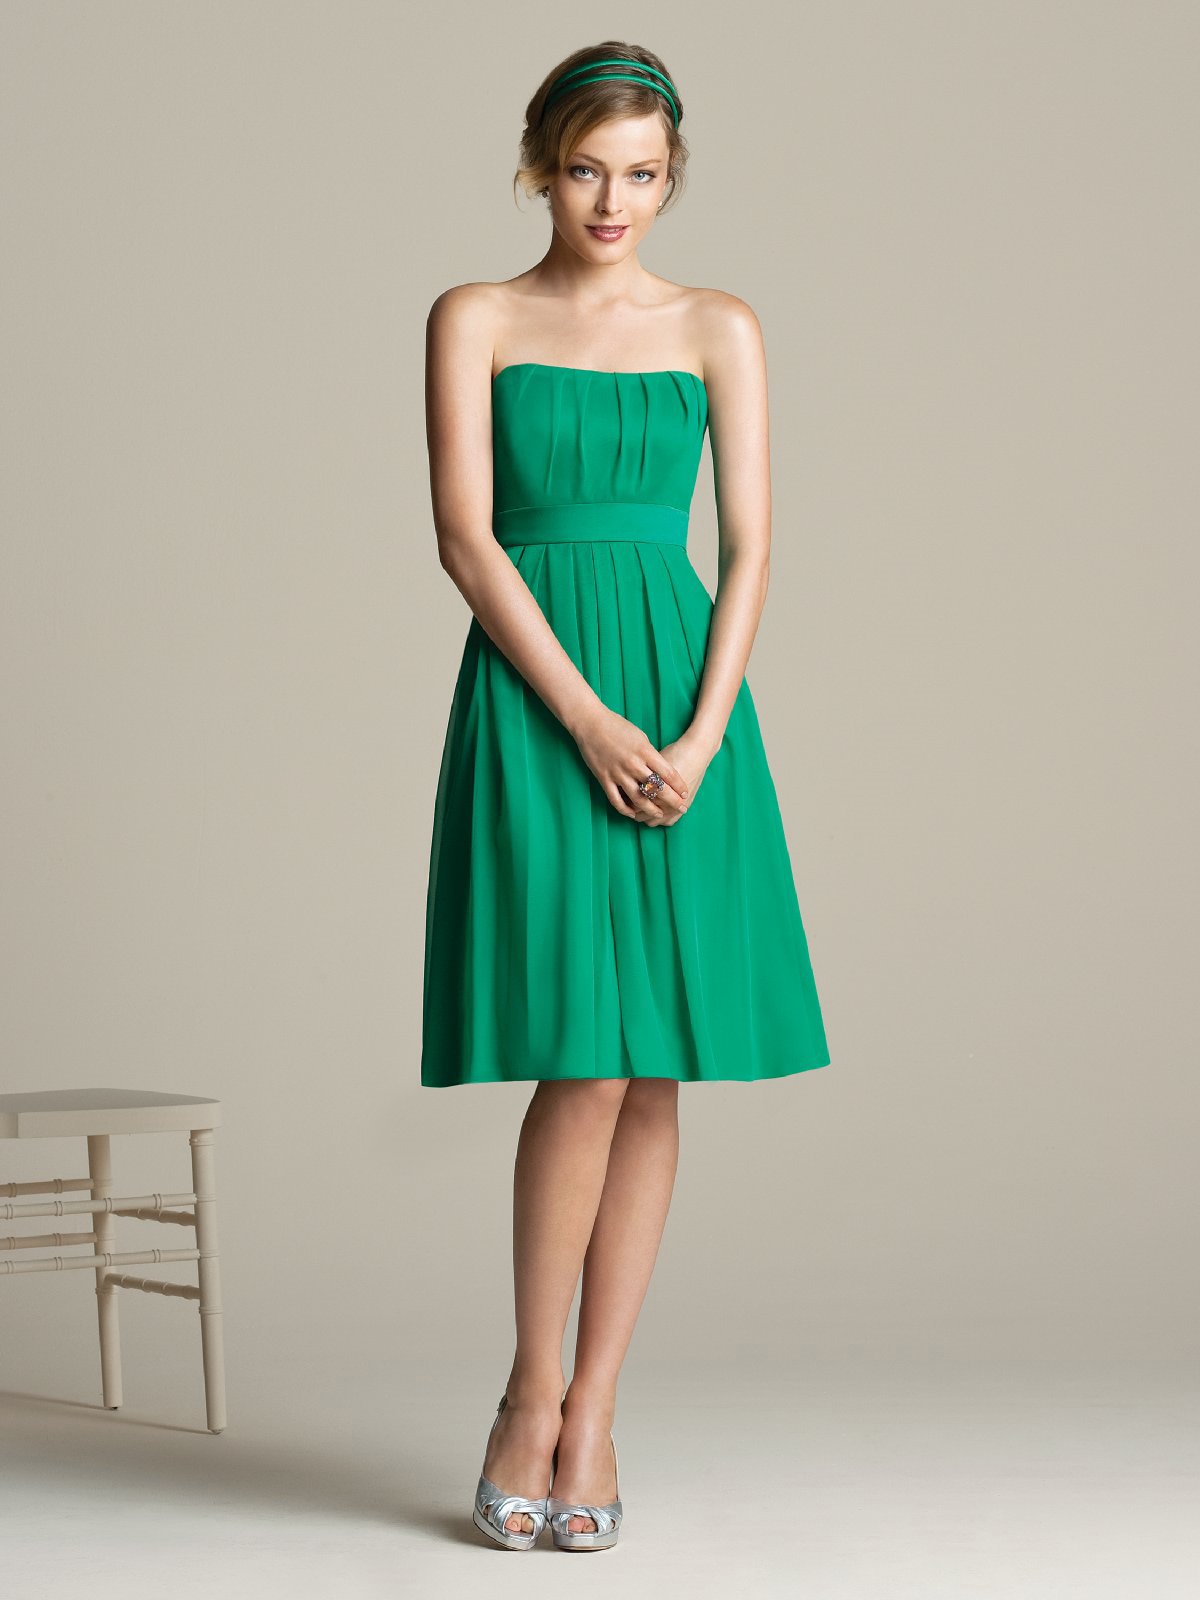 Green A Line Strapless Zipper Knee Length Pleated Chiffon Prom Dresses With Belt 